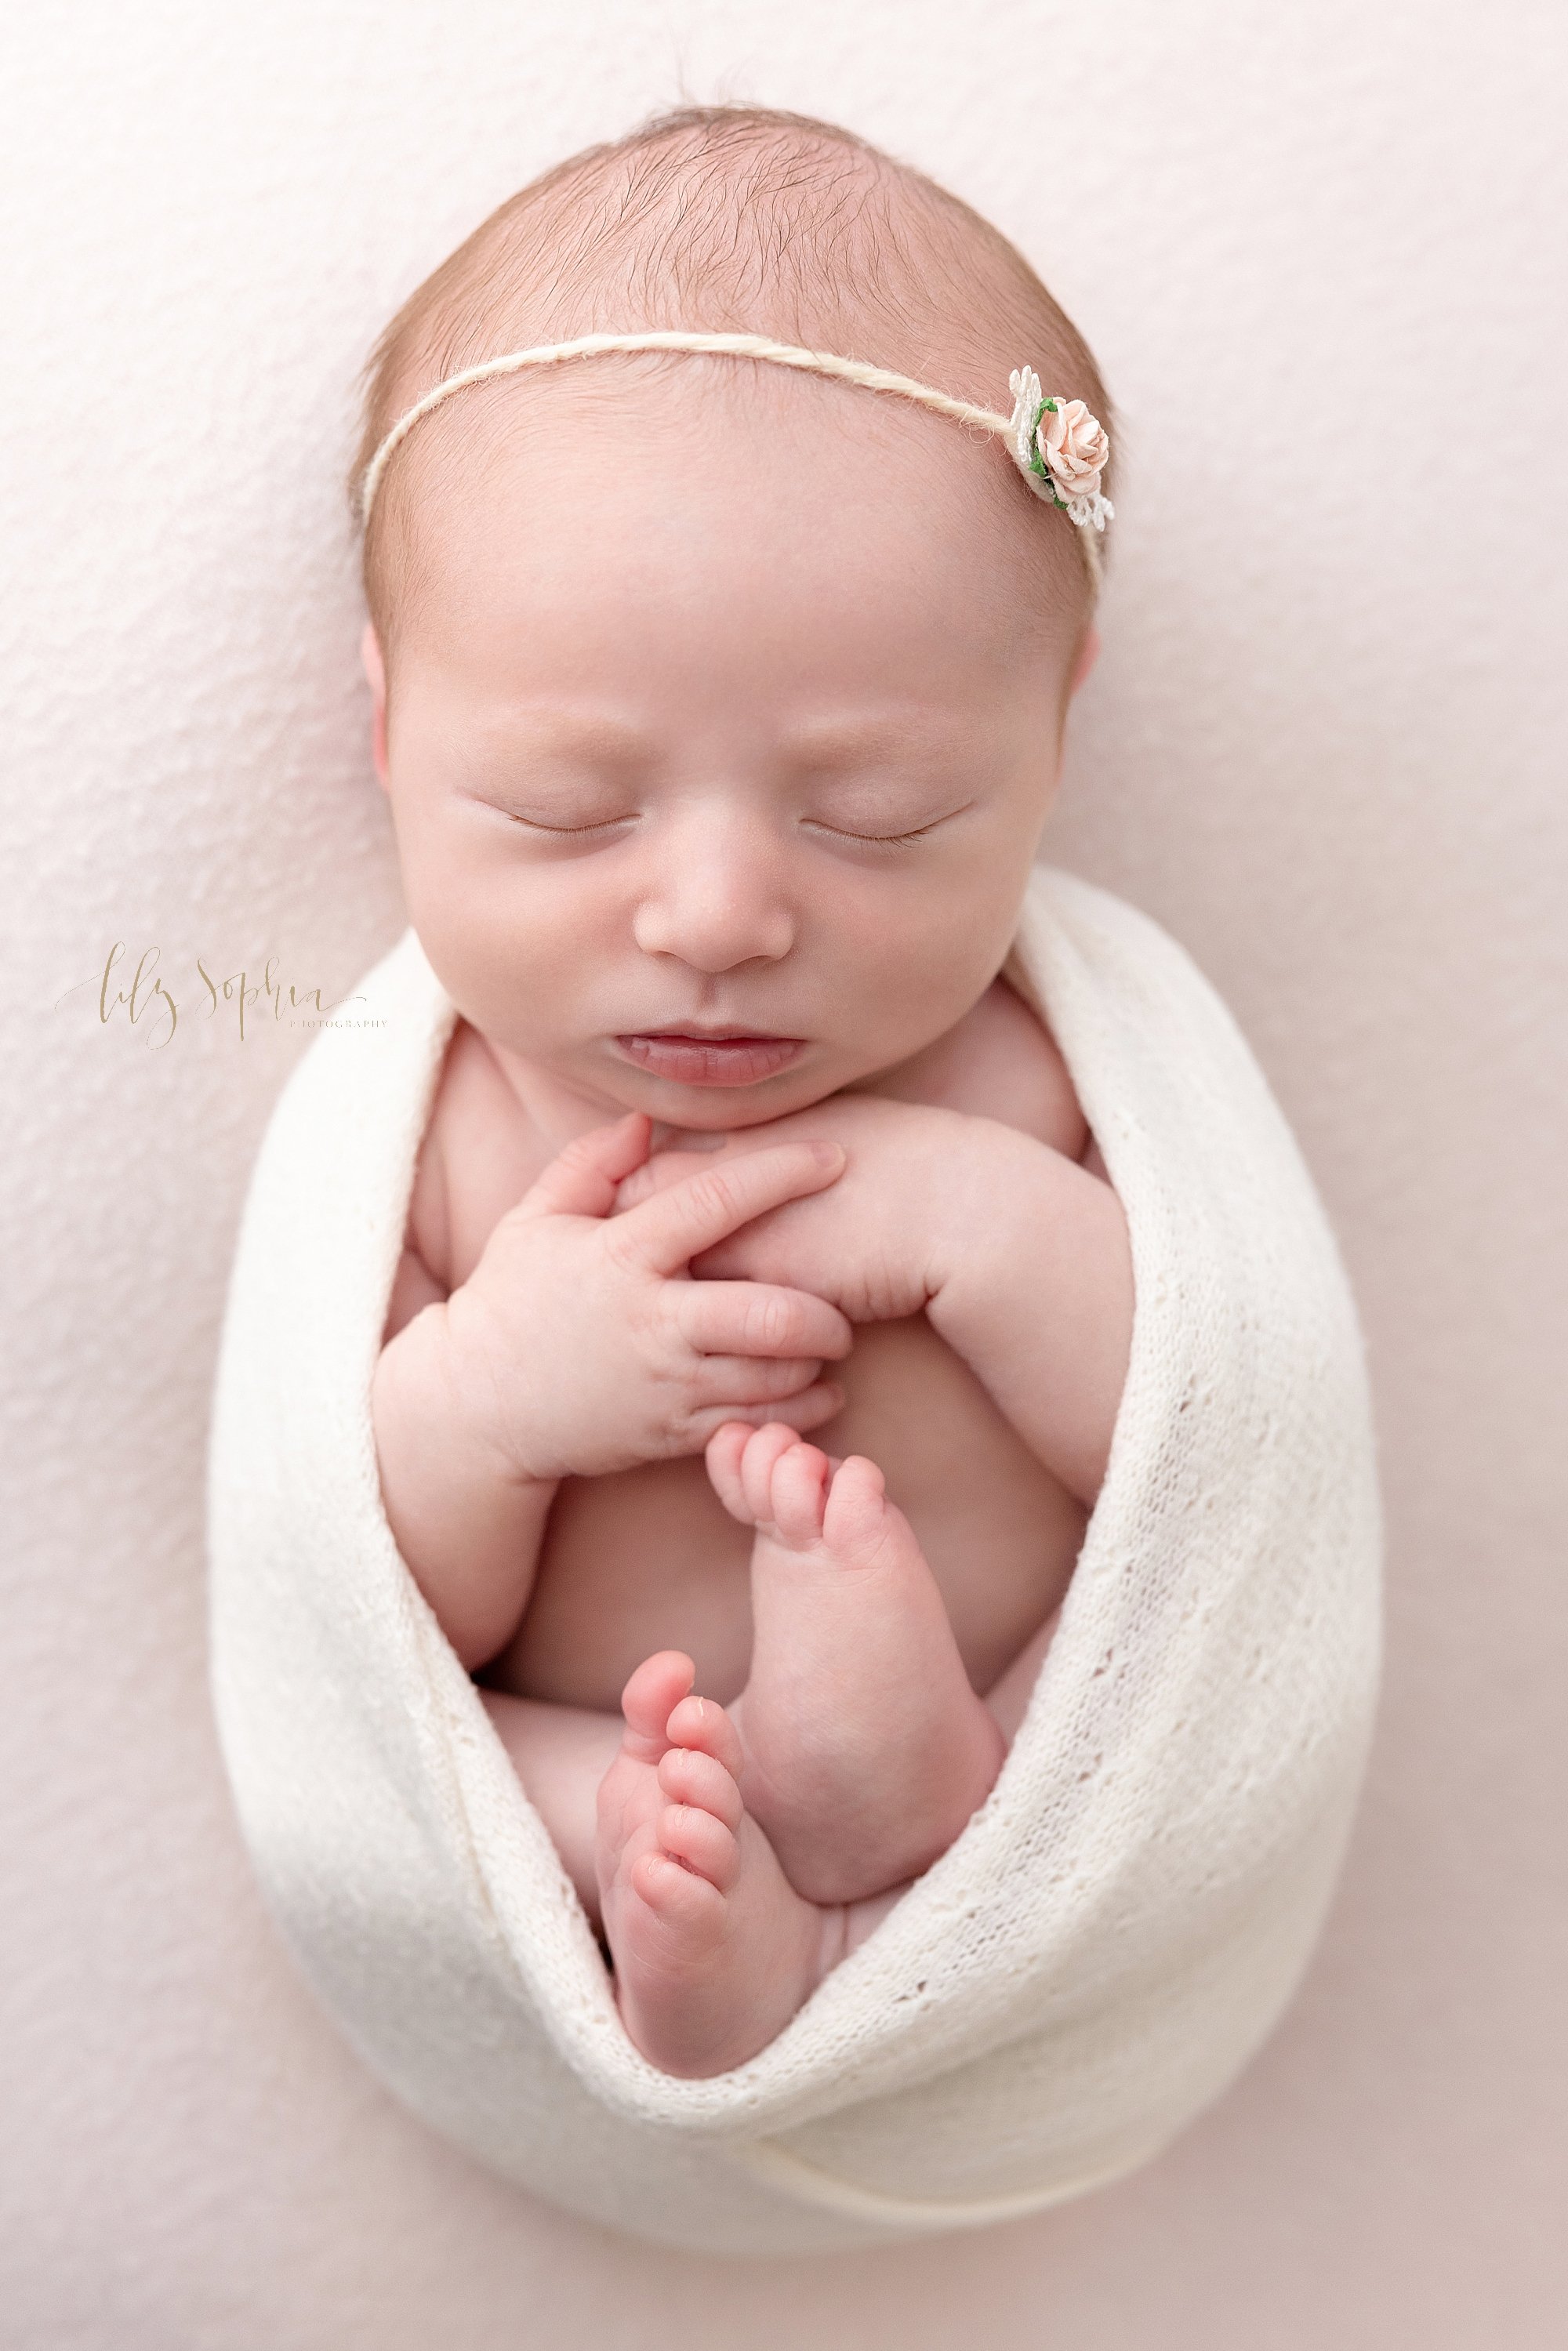  Newborn photo session with a newborn baby girl wearing a delicate rose headband in her wispy hair as she sleeps tucked into a stretchy swaddle taken in natural light in a photography studio near Buckhead in Atlanta. 